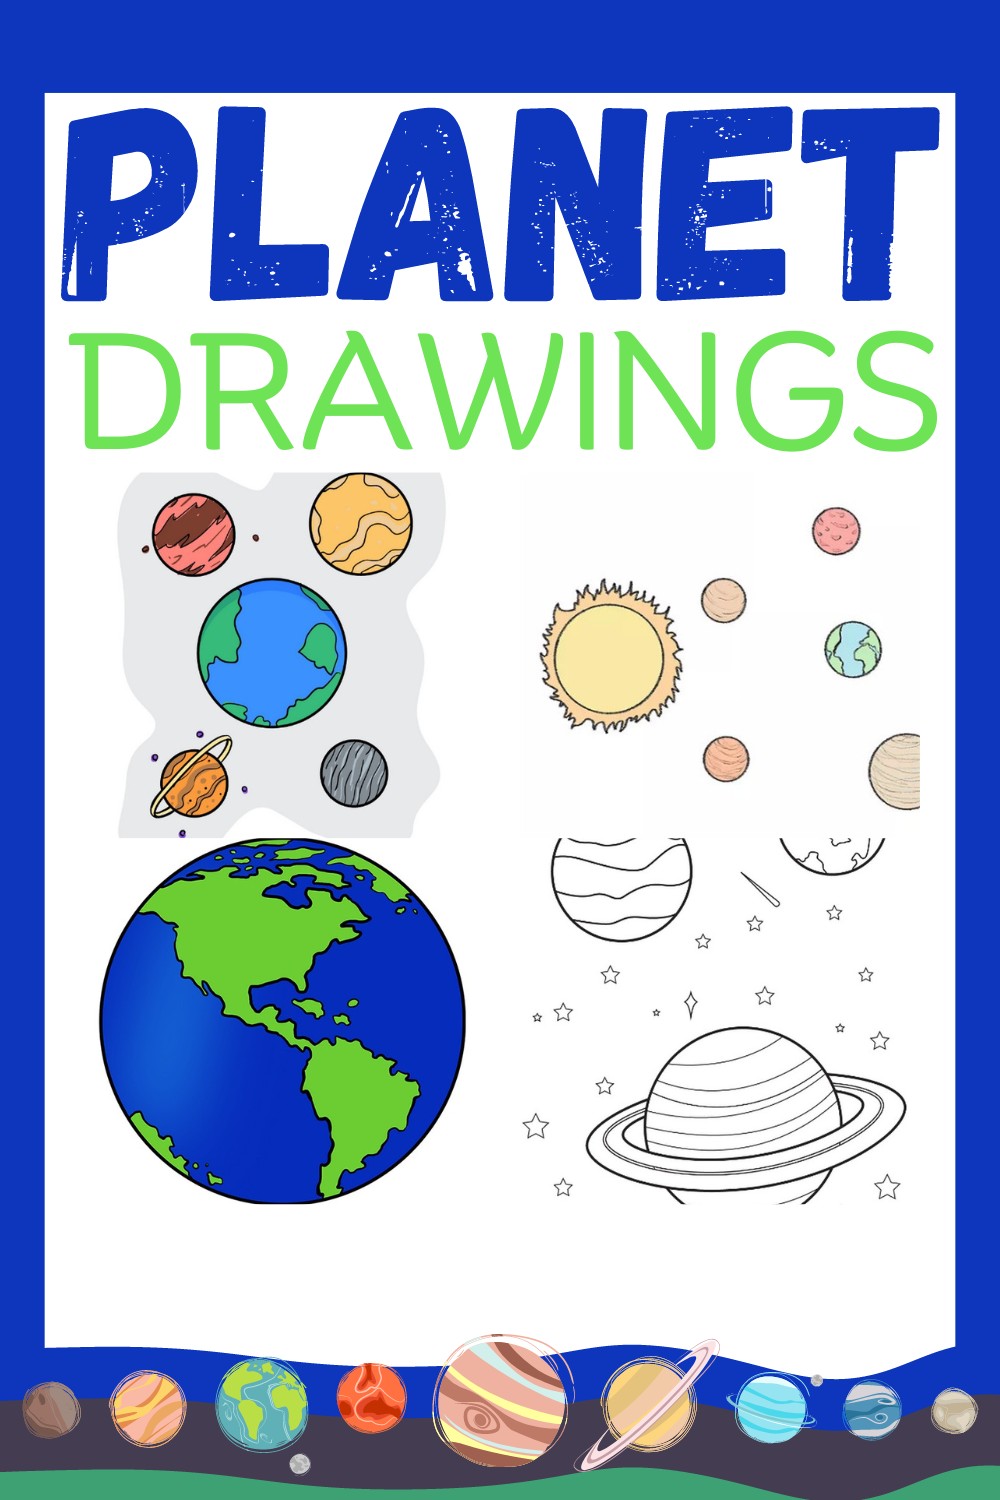 Solar System Drawing Tutorial - How to draw Solar System step by step-anthinhphatland.vn